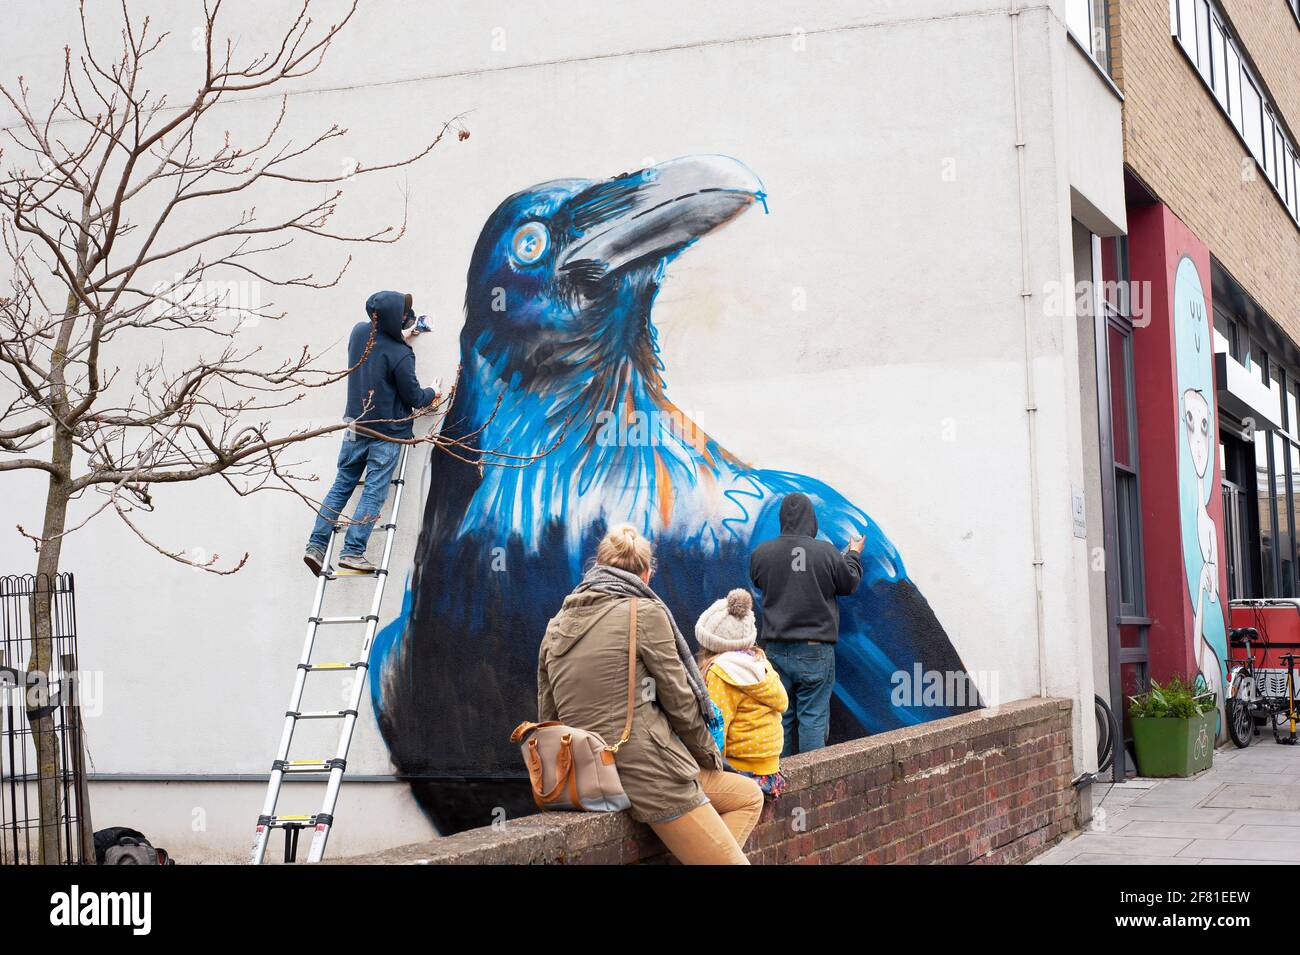 Street artists: Boe + Irony in action. Crow mural in the making on Whiston Road, E2 East London, UK. Apr 2013 Stock Photo